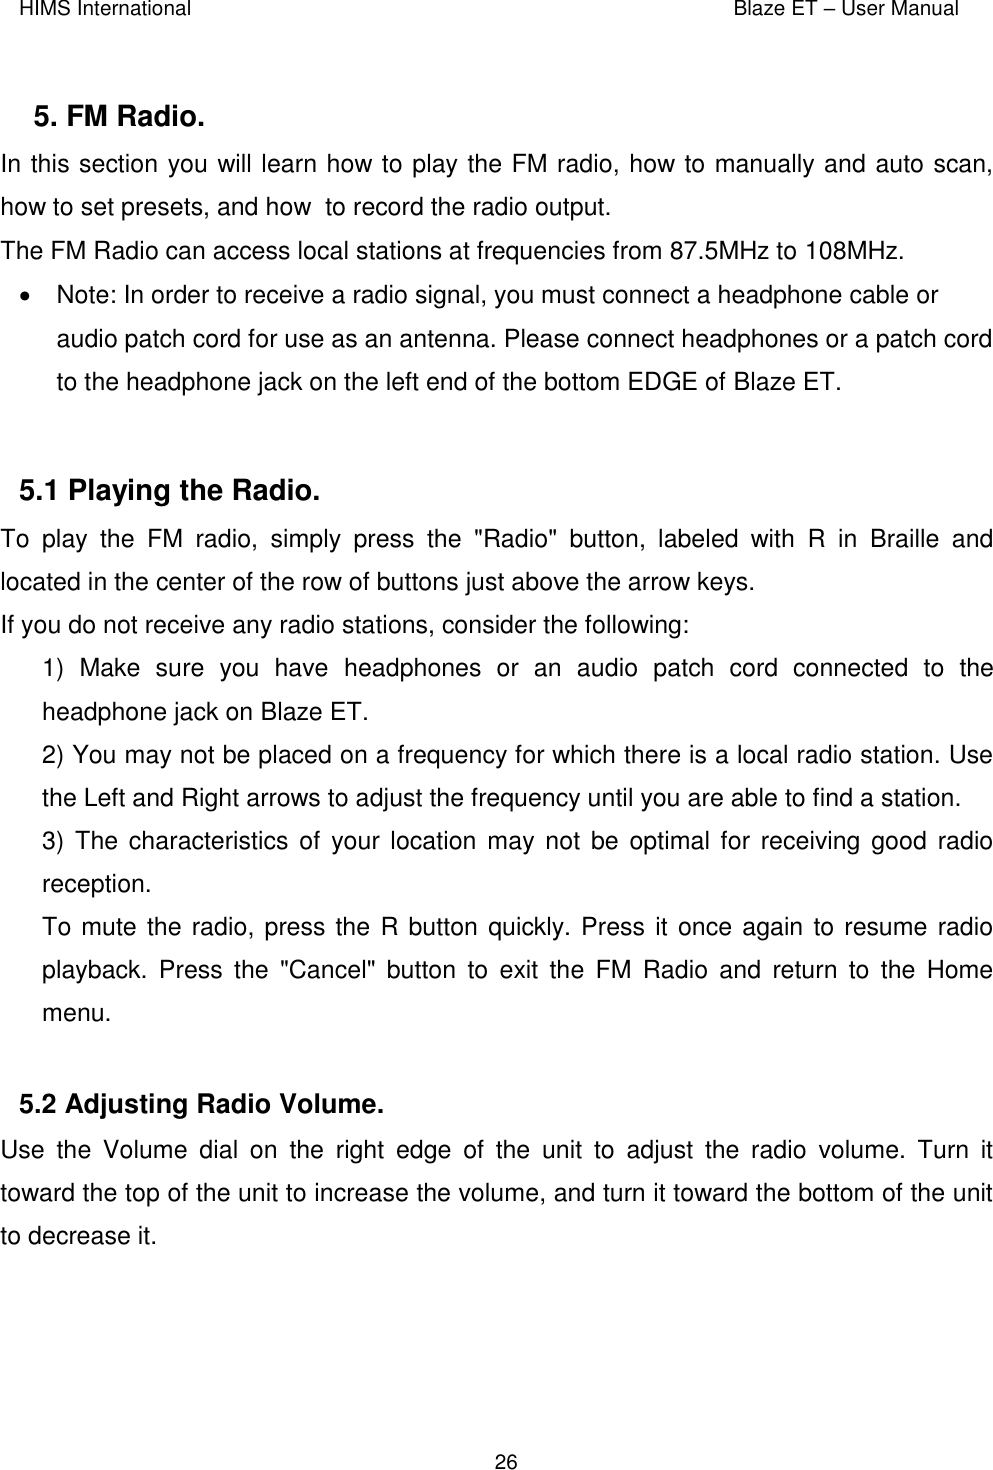 HIMS International    Blaze ET – User Manual      26  5. FM Radio.  In this section you will learn how to play the FM radio, how to manually and auto scan, how to set presets, and how  to record the radio output. The FM Radio can access local stations at frequencies from 87.5MHz to 108MHz.    Note: In order to receive a radio signal, you must connect a headphone cable or audio patch cord for use as an antenna. Please connect headphones or a patch cord to the headphone jack on the left end of the bottom EDGE of Blaze ET.   5.1 Playing the Radio.  To  play  the  FM  radio,  simply  press  the  &quot;Radio&quot;  button,  labeled  with  R  in  Braille  and located in the center of the row of buttons just above the arrow keys.  If you do not receive any radio stations, consider the following: 1)  Make  sure  you  have  headphones  or  an  audio  patch  cord  connected  to  the headphone jack on Blaze ET. 2) You may not be placed on a frequency for which there is a local radio station. Use the Left and Right arrows to adjust the frequency until you are able to find a station. 3) The characteristics of your  location may not be optimal for  receiving good radio reception. To mute the radio, press the R button quickly. Press it once again to resume radio playback.  Press  the  &quot;Cancel&quot;  button  to  exit  the  FM  Radio  and  return  to  the  Home menu.  5.2 Adjusting Radio Volume.  Use  the  Volume  dial  on  the  right  edge  of  the  unit  to  adjust  the  radio  volume.  Turn  it toward the top of the unit to increase the volume, and turn it toward the bottom of the unit to decrease it.  